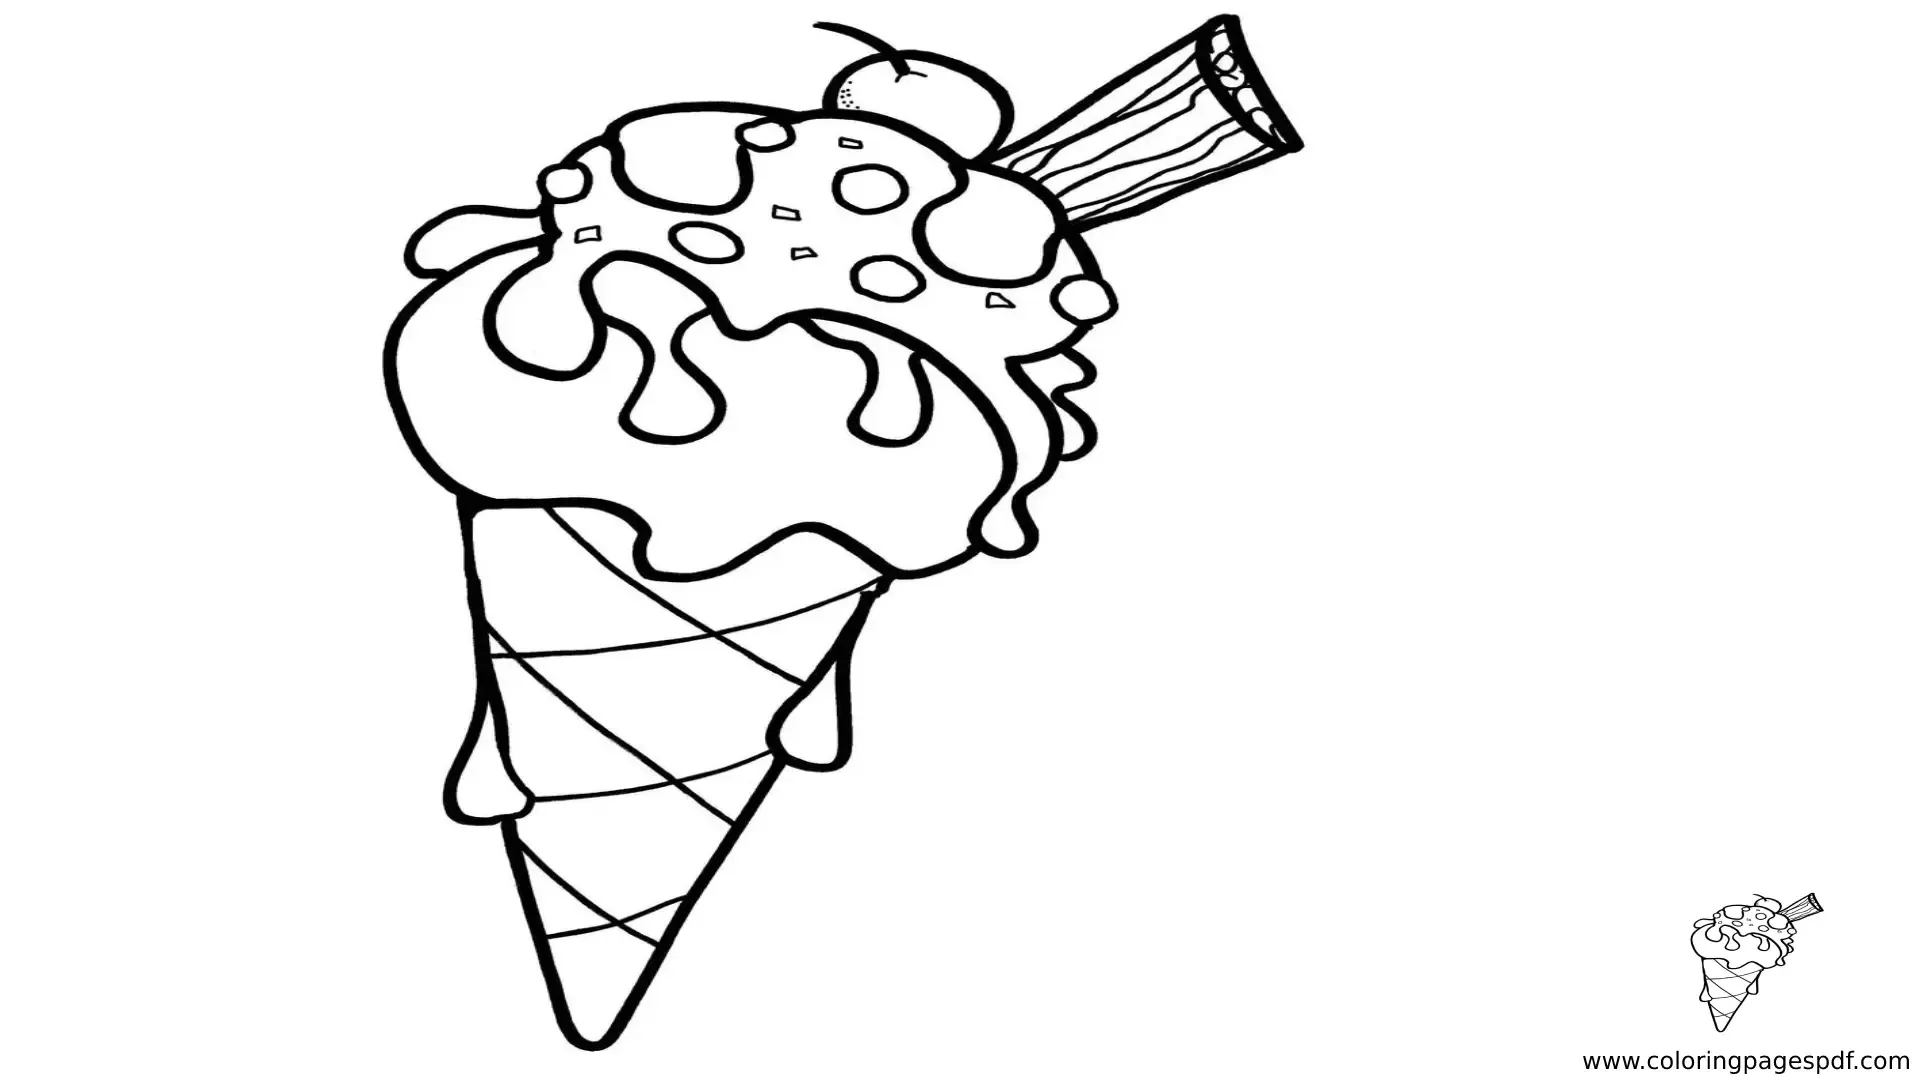 Coloring Pages Of Ice Cream Cone With A Cherry On Top